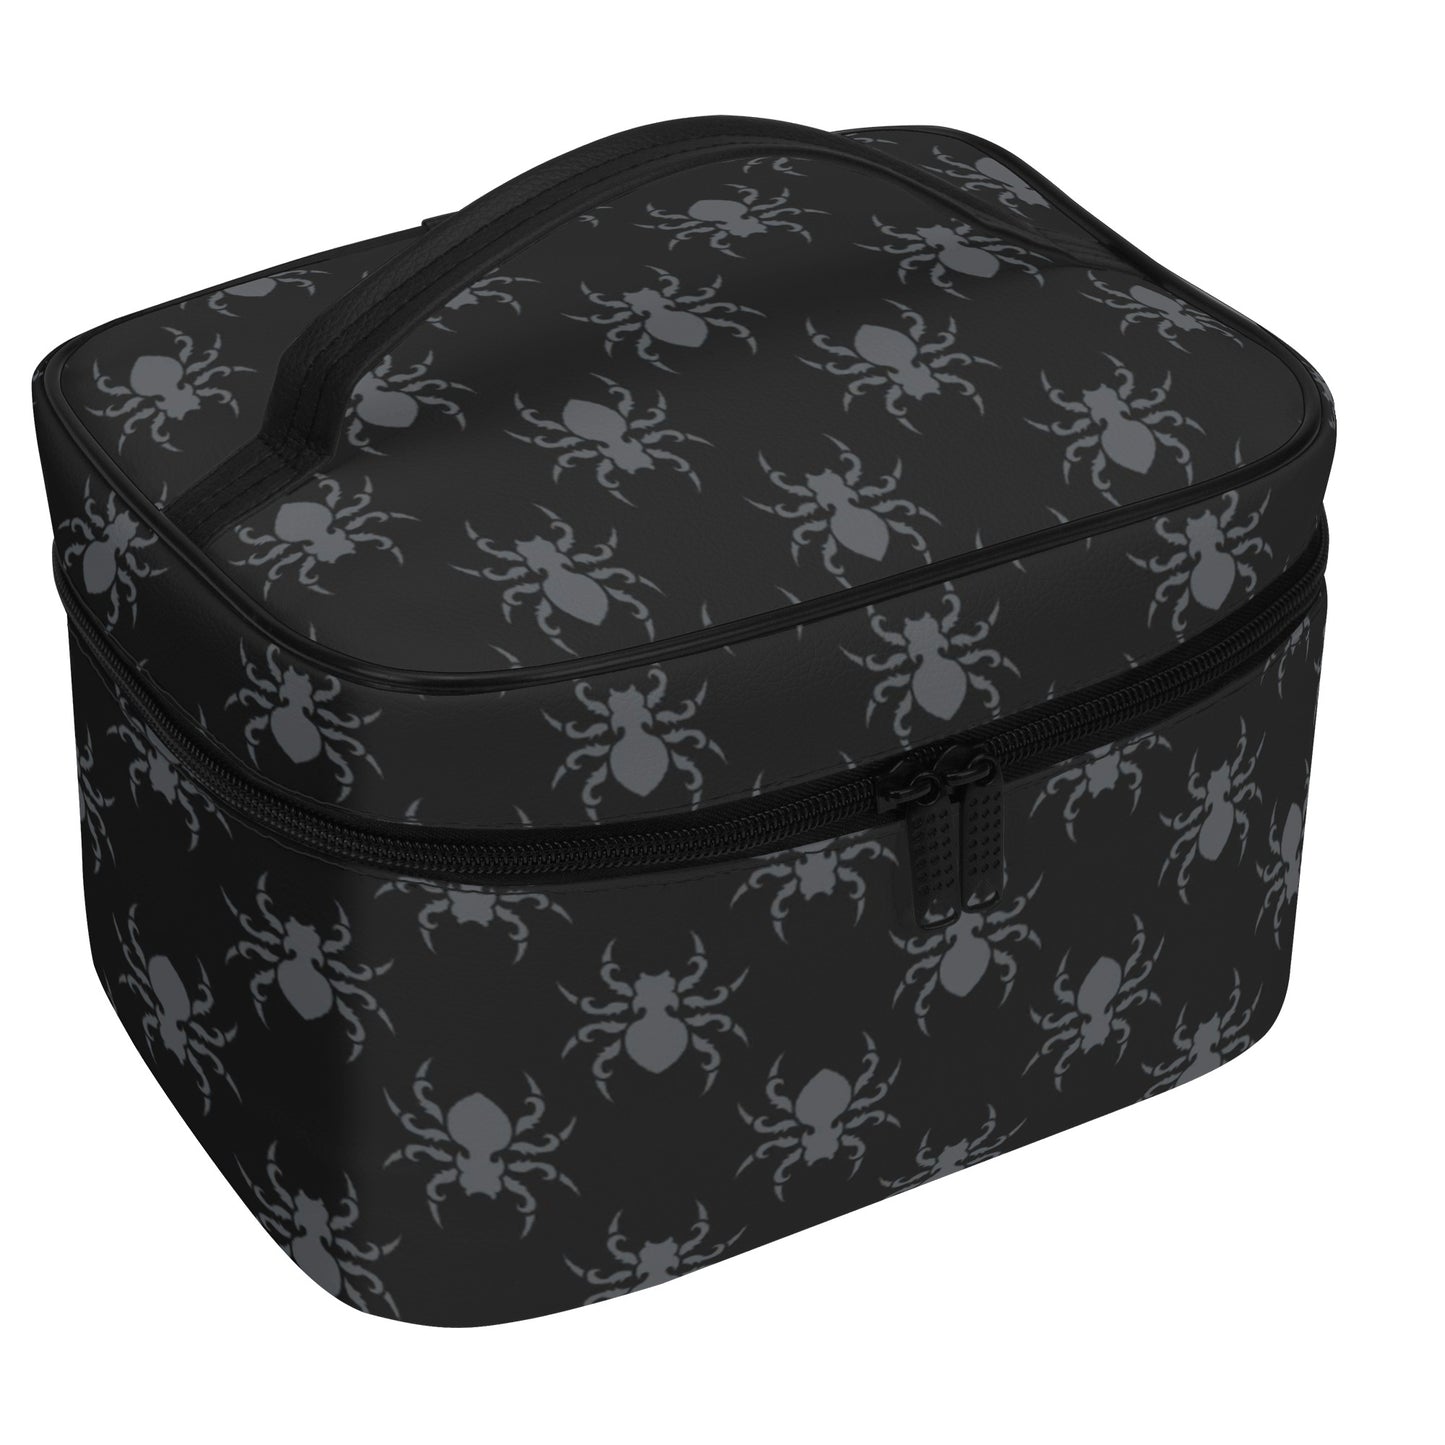 Gothic Spiders Leather Cosmetic Bag